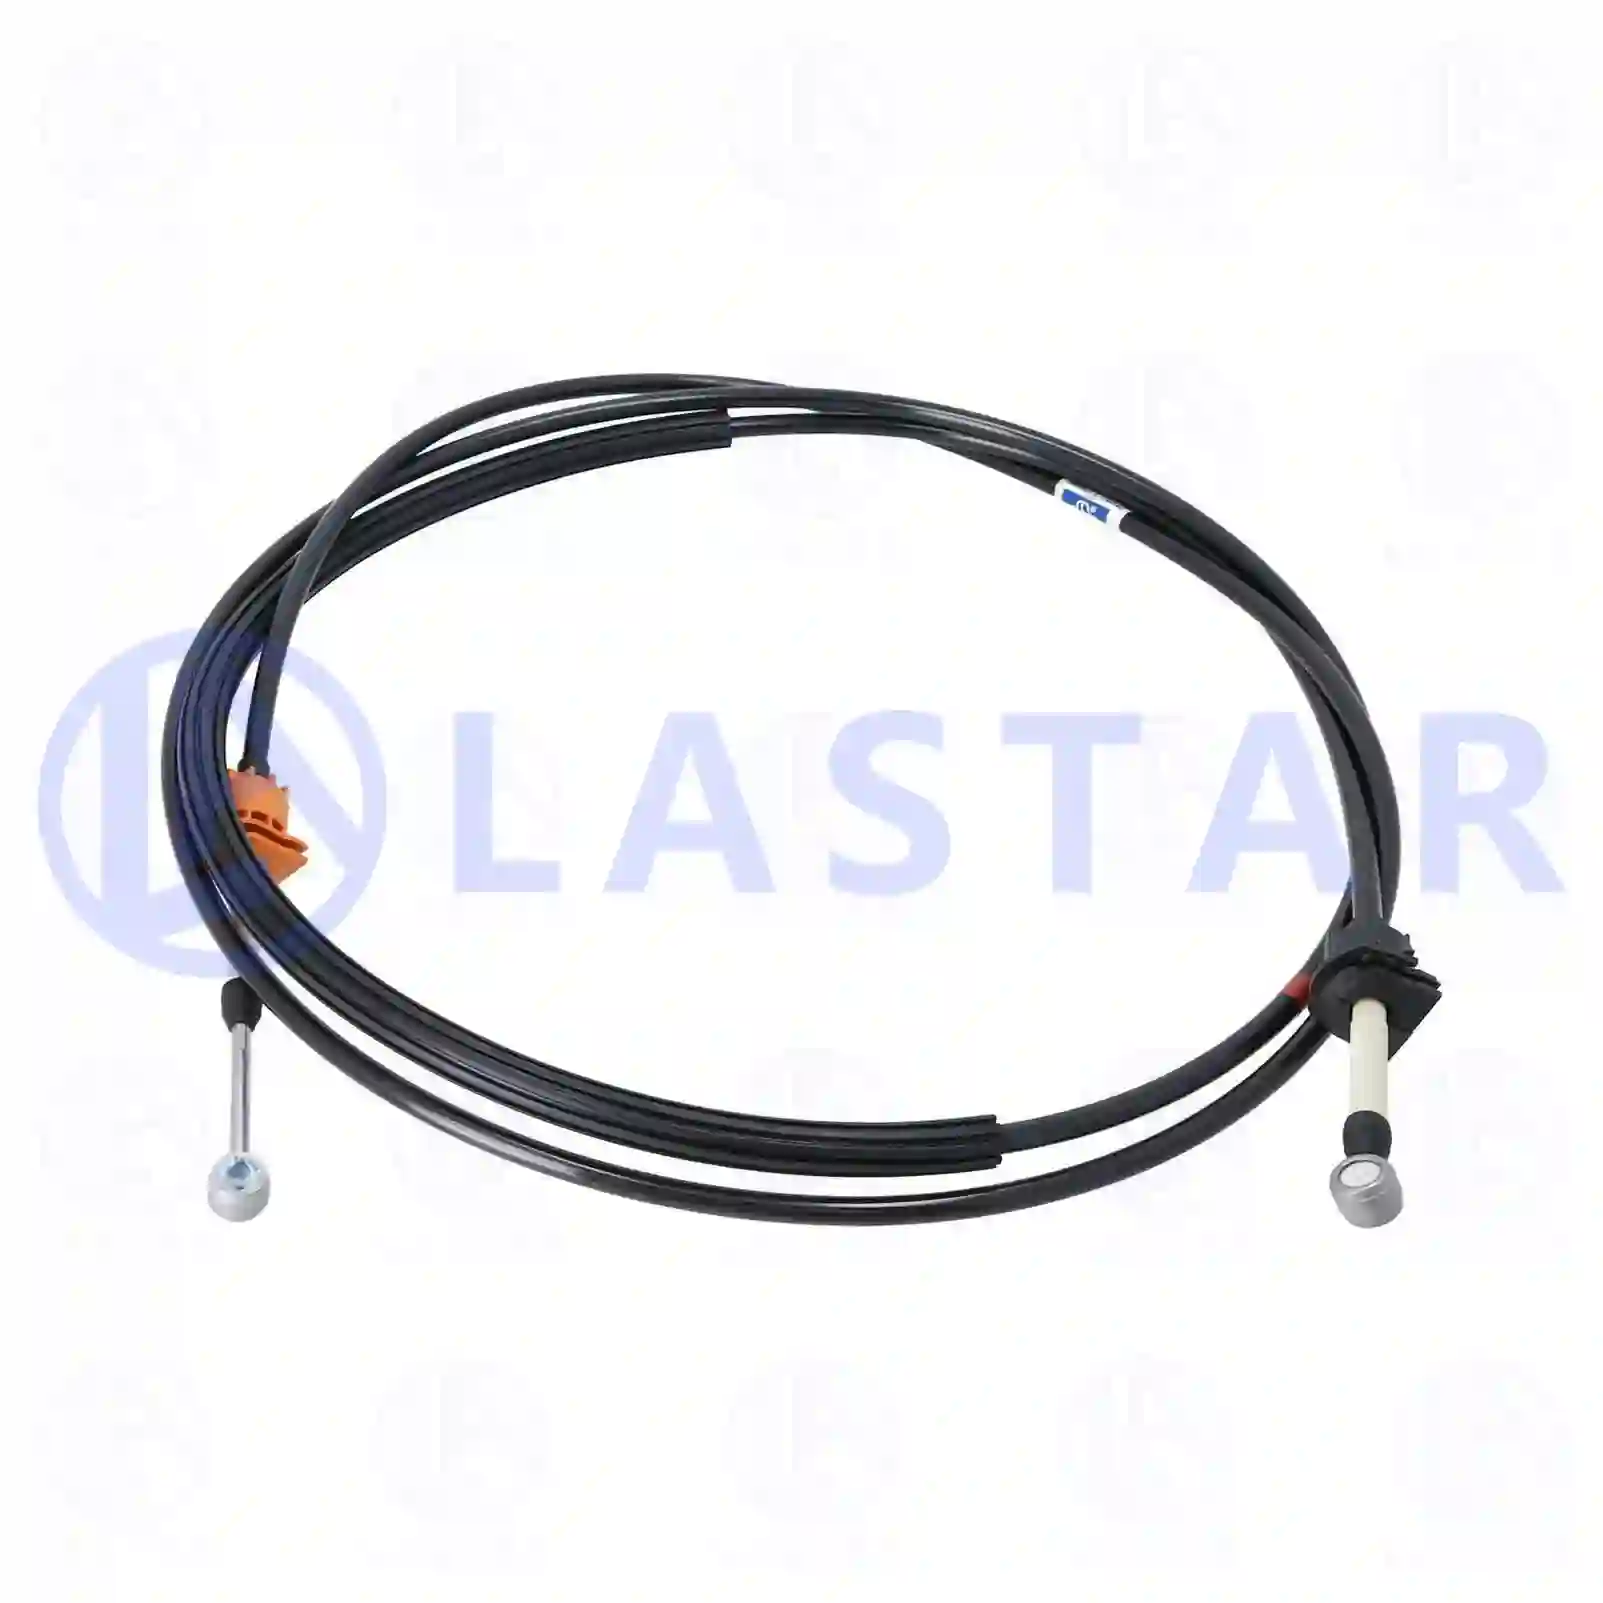 Control cable, switching, 77732419, 20545980, 20700980, 21002880, 21789708, ZG21345-0008 ||  77732419 Lastar Spare Part | Truck Spare Parts, Auotomotive Spare Parts Control cable, switching, 77732419, 20545980, 20700980, 21002880, 21789708, ZG21345-0008 ||  77732419 Lastar Spare Part | Truck Spare Parts, Auotomotive Spare Parts